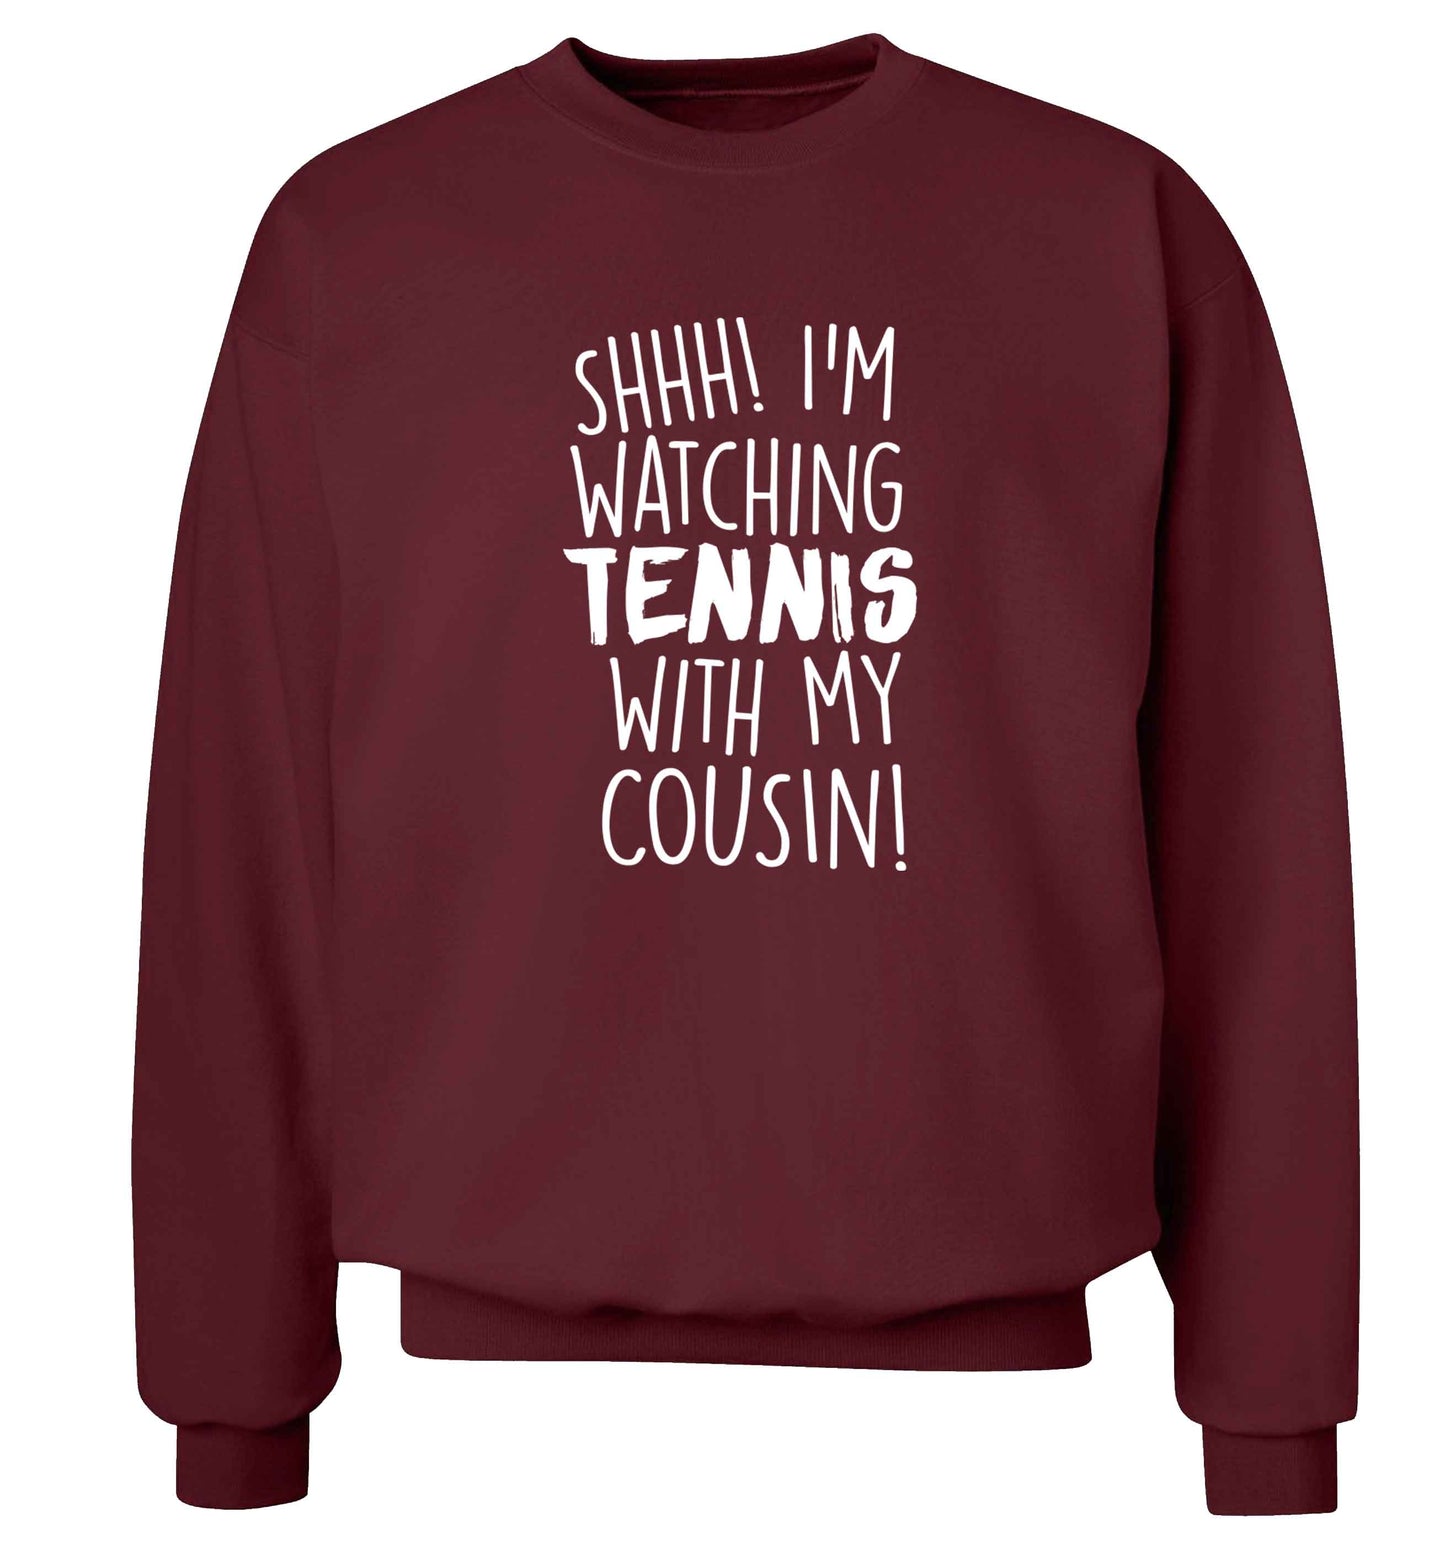 Shh! I'm watching tennis with my cousin! Adult's unisex maroon Sweater 2XL